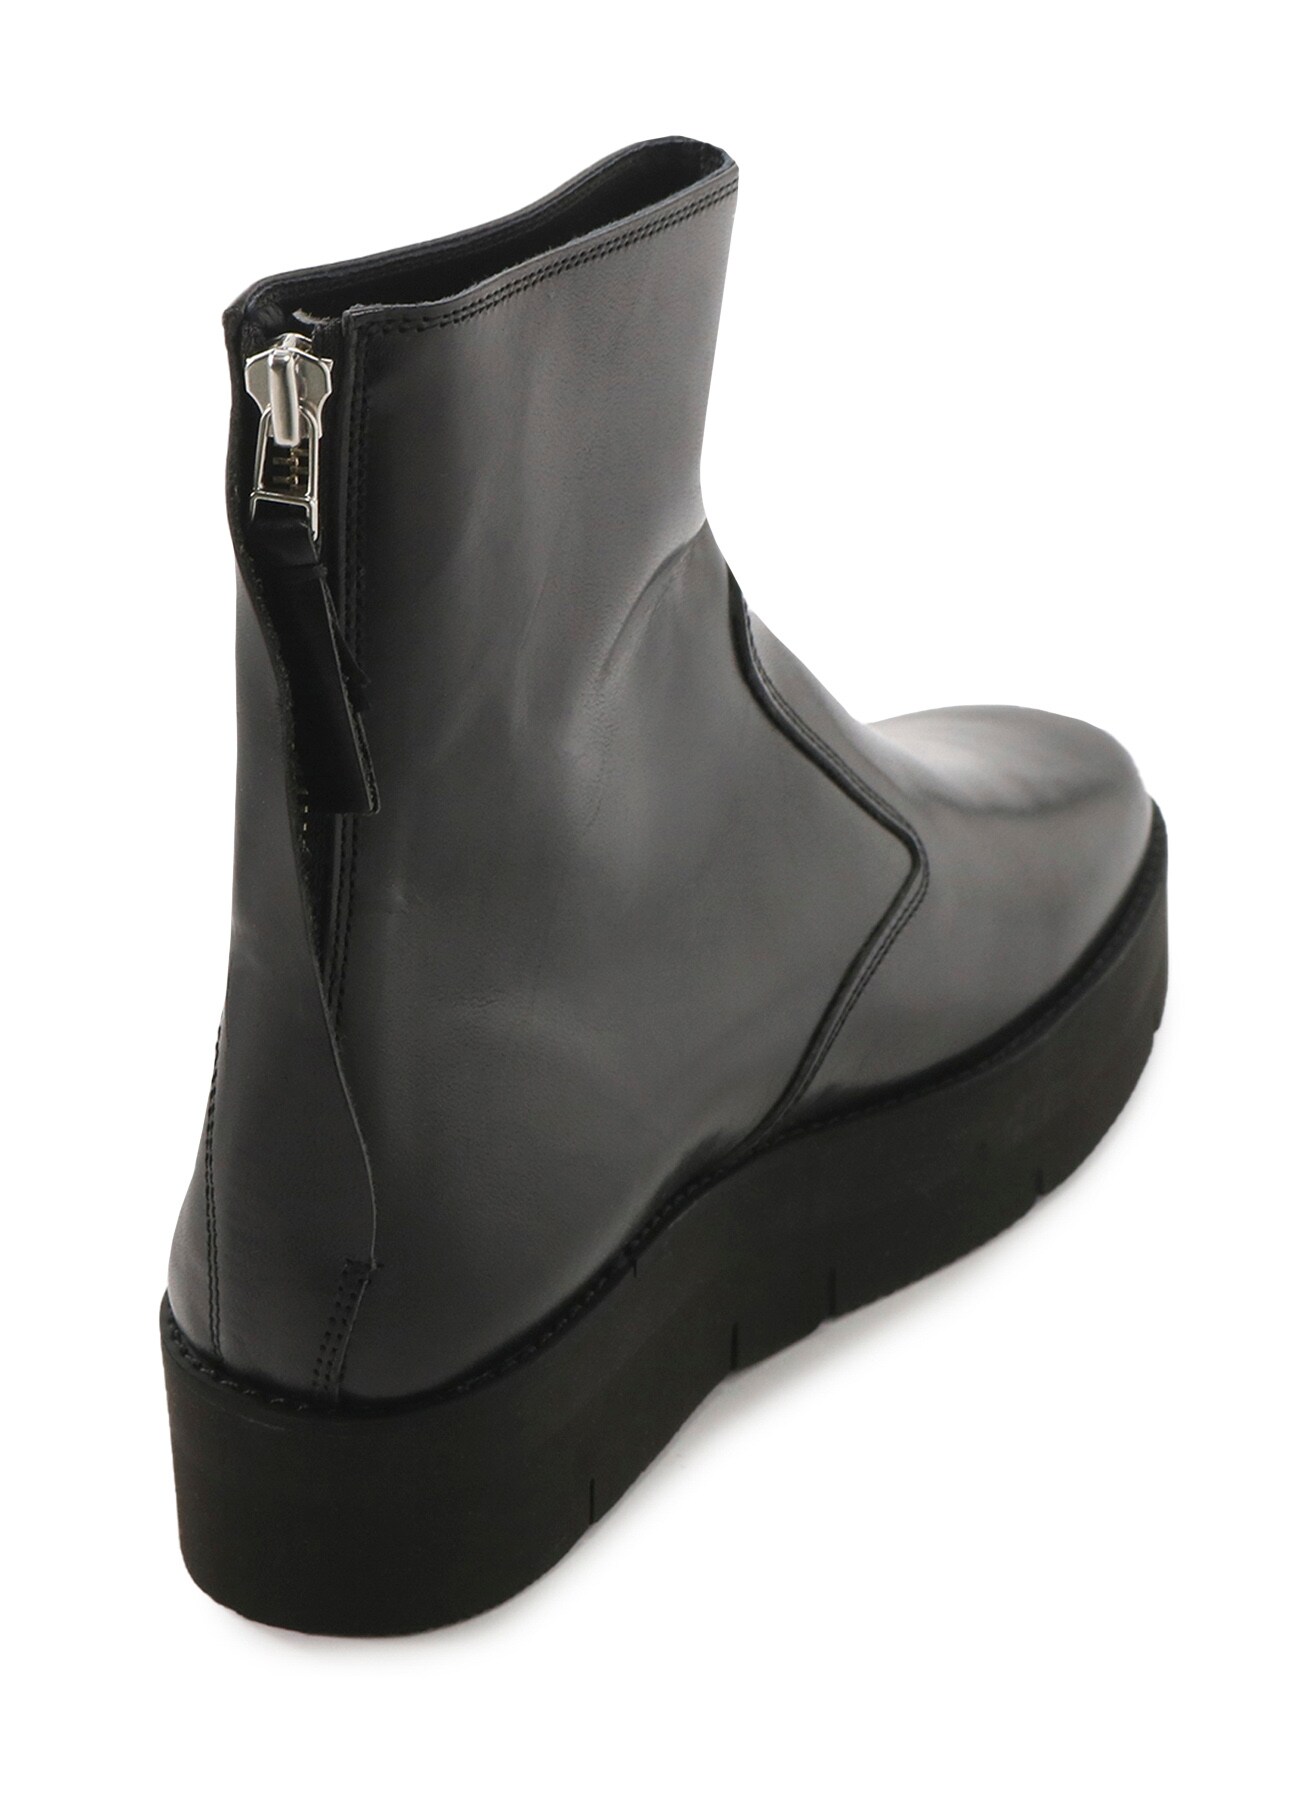 SHINING LEATHER BACK ZIP BOOTS